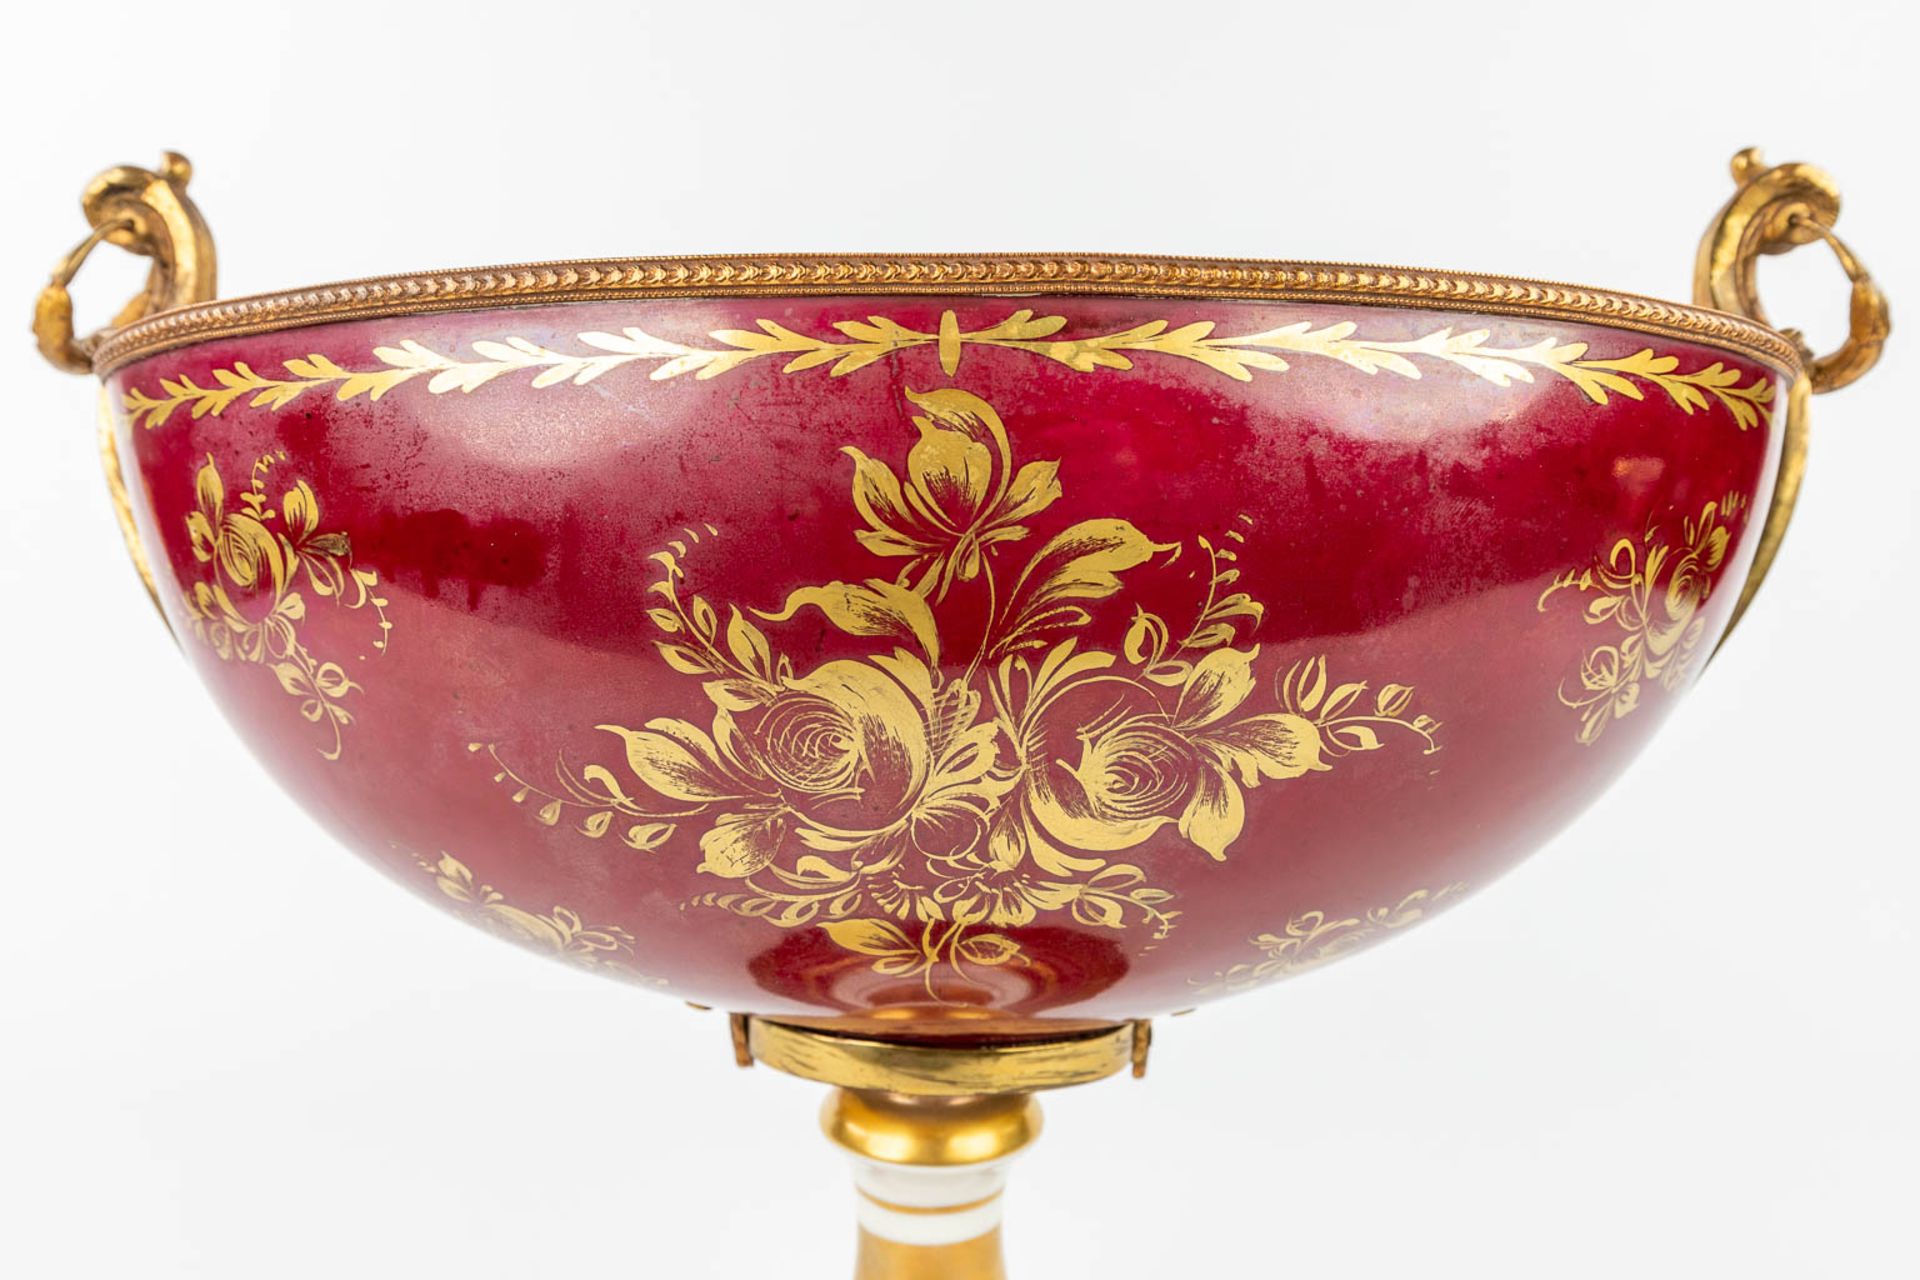 Limoges, a large bowl on a stand, with hand-painted decor. (L:20 x W:37 x H:31 cm) - Image 11 of 16